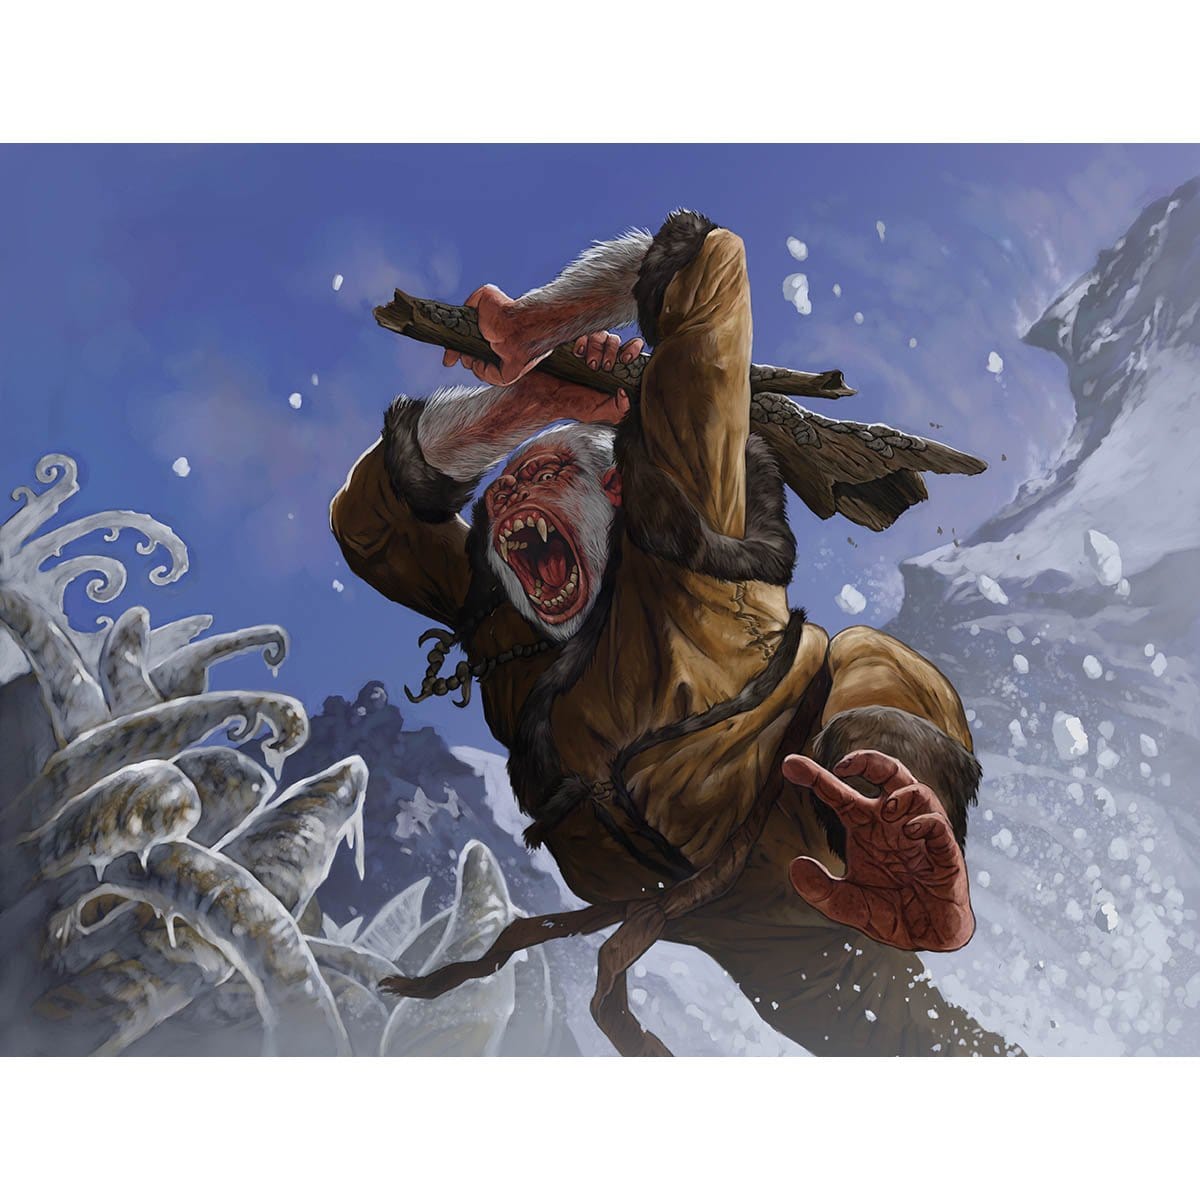 Simian Brawler Print - Print - Original Magic Art - Accessories for Magic the Gathering and other card games